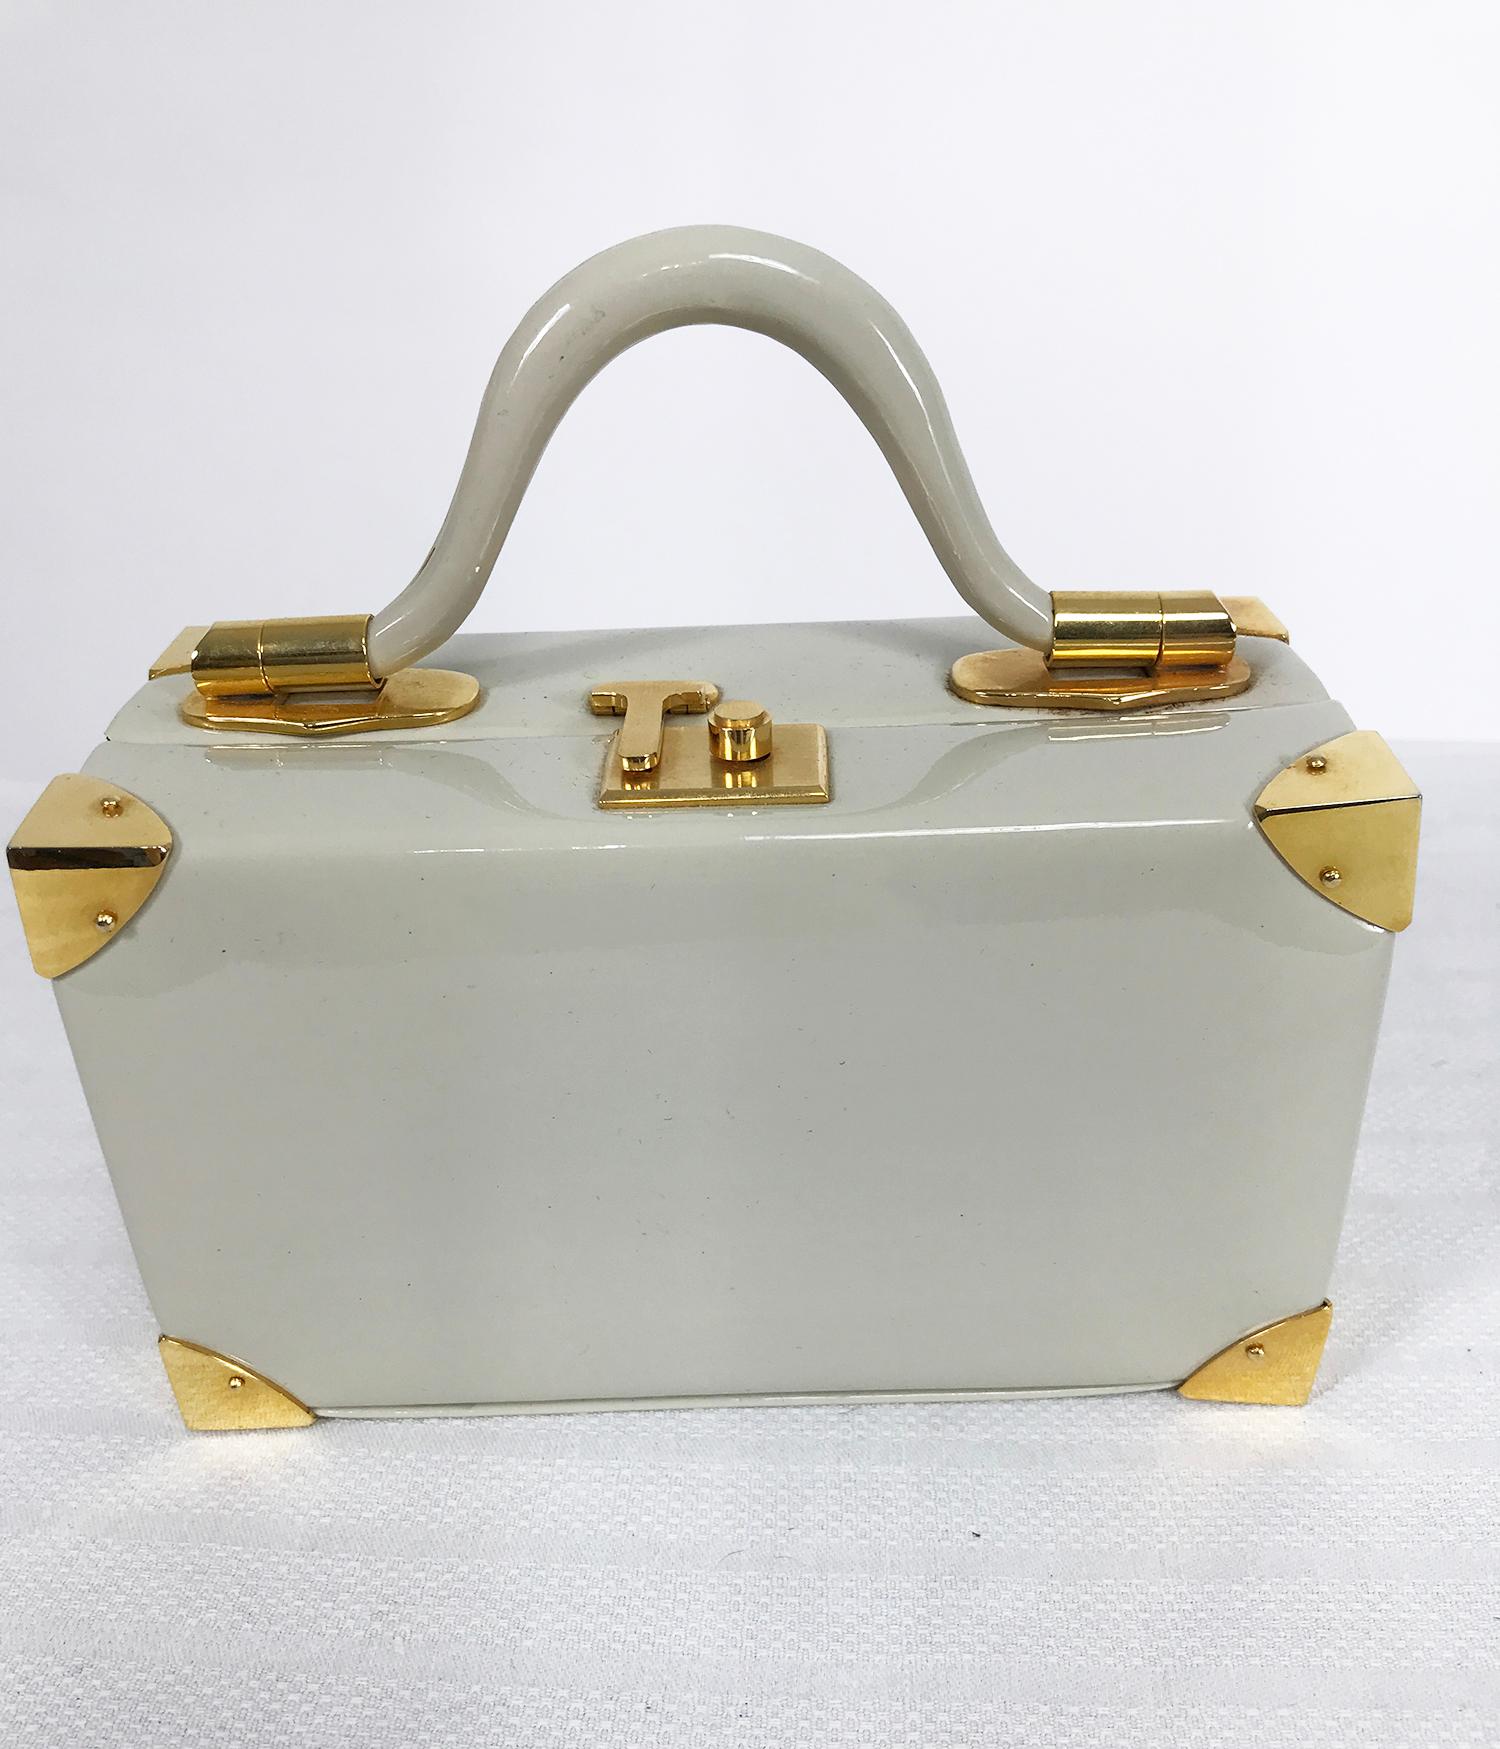 Judith Leiber rare 1960s taupe patent leather suit case, mini handbag. Trimmed in gold metal hardware, this small bag impersonates a suit case and was named so by Judith Leiber. Rigid curved handle with gold hardware, the bag has a brushed gold push